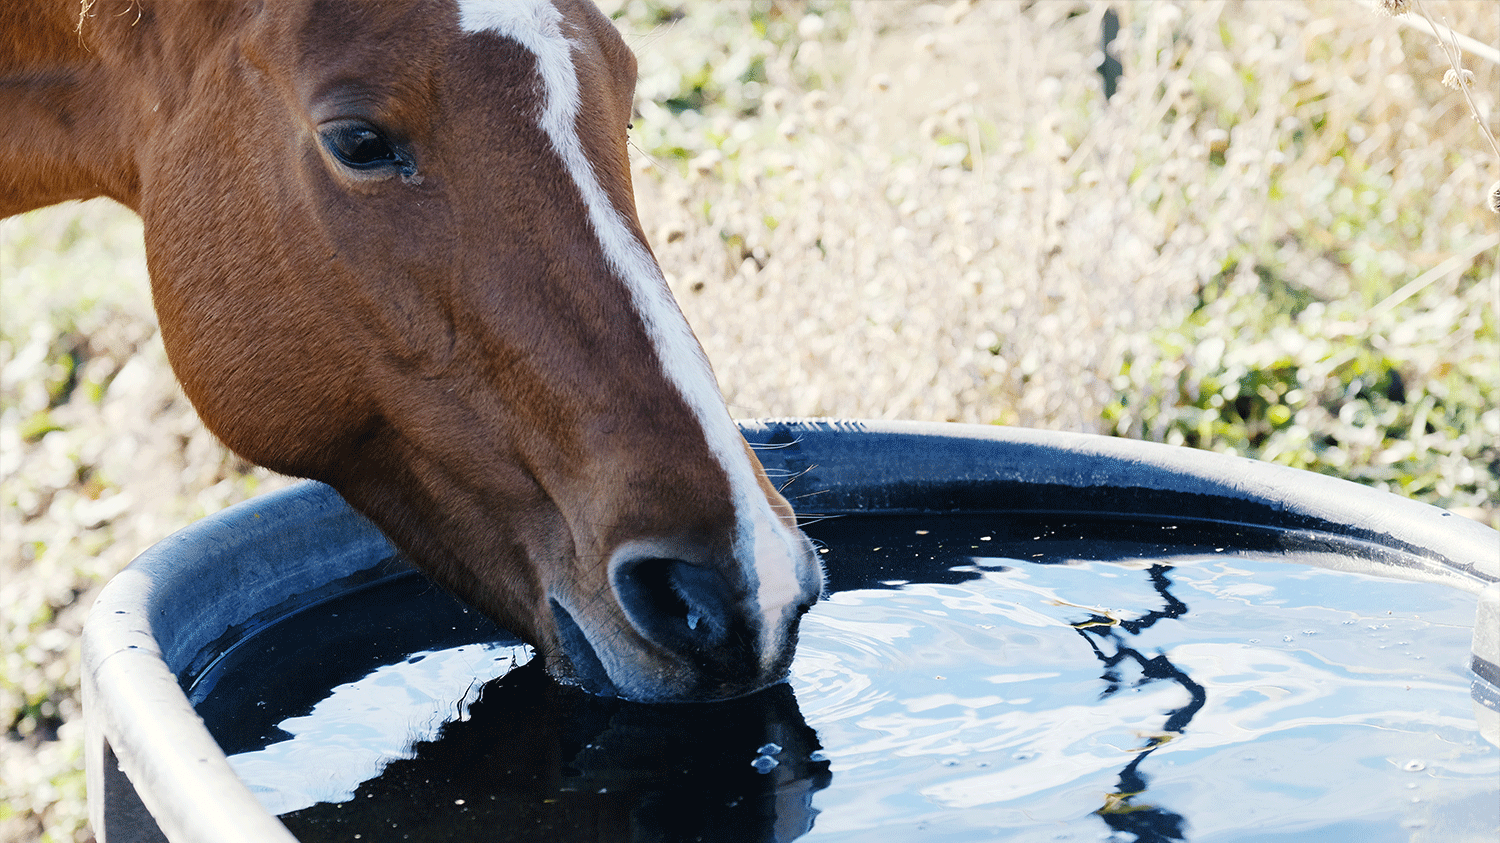 Horse drinking water out of trough